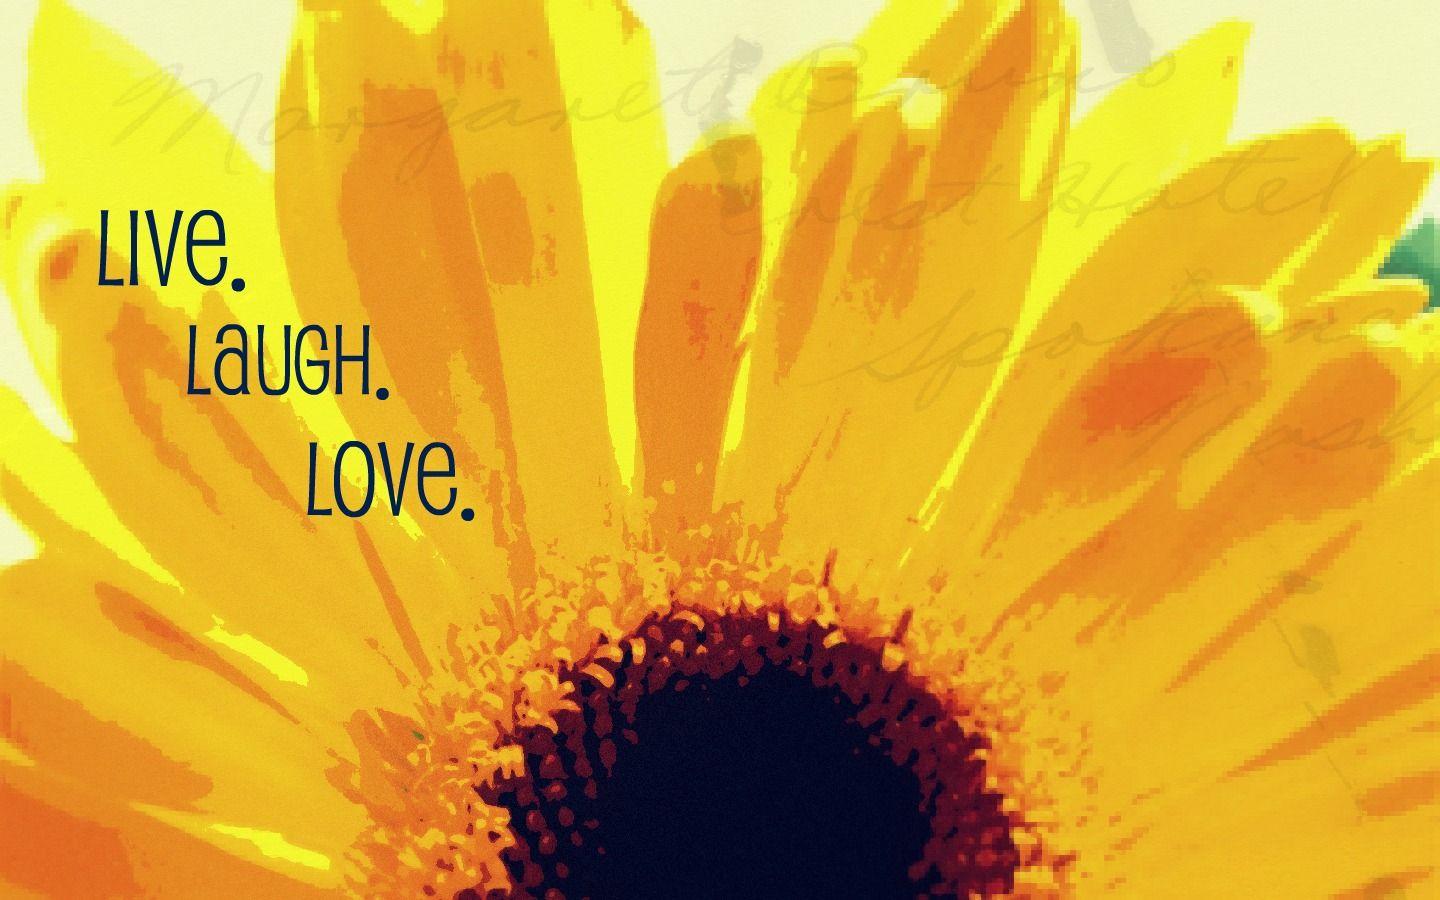 live laugh love iphone 5 wallpaper Wallppapers Gallery